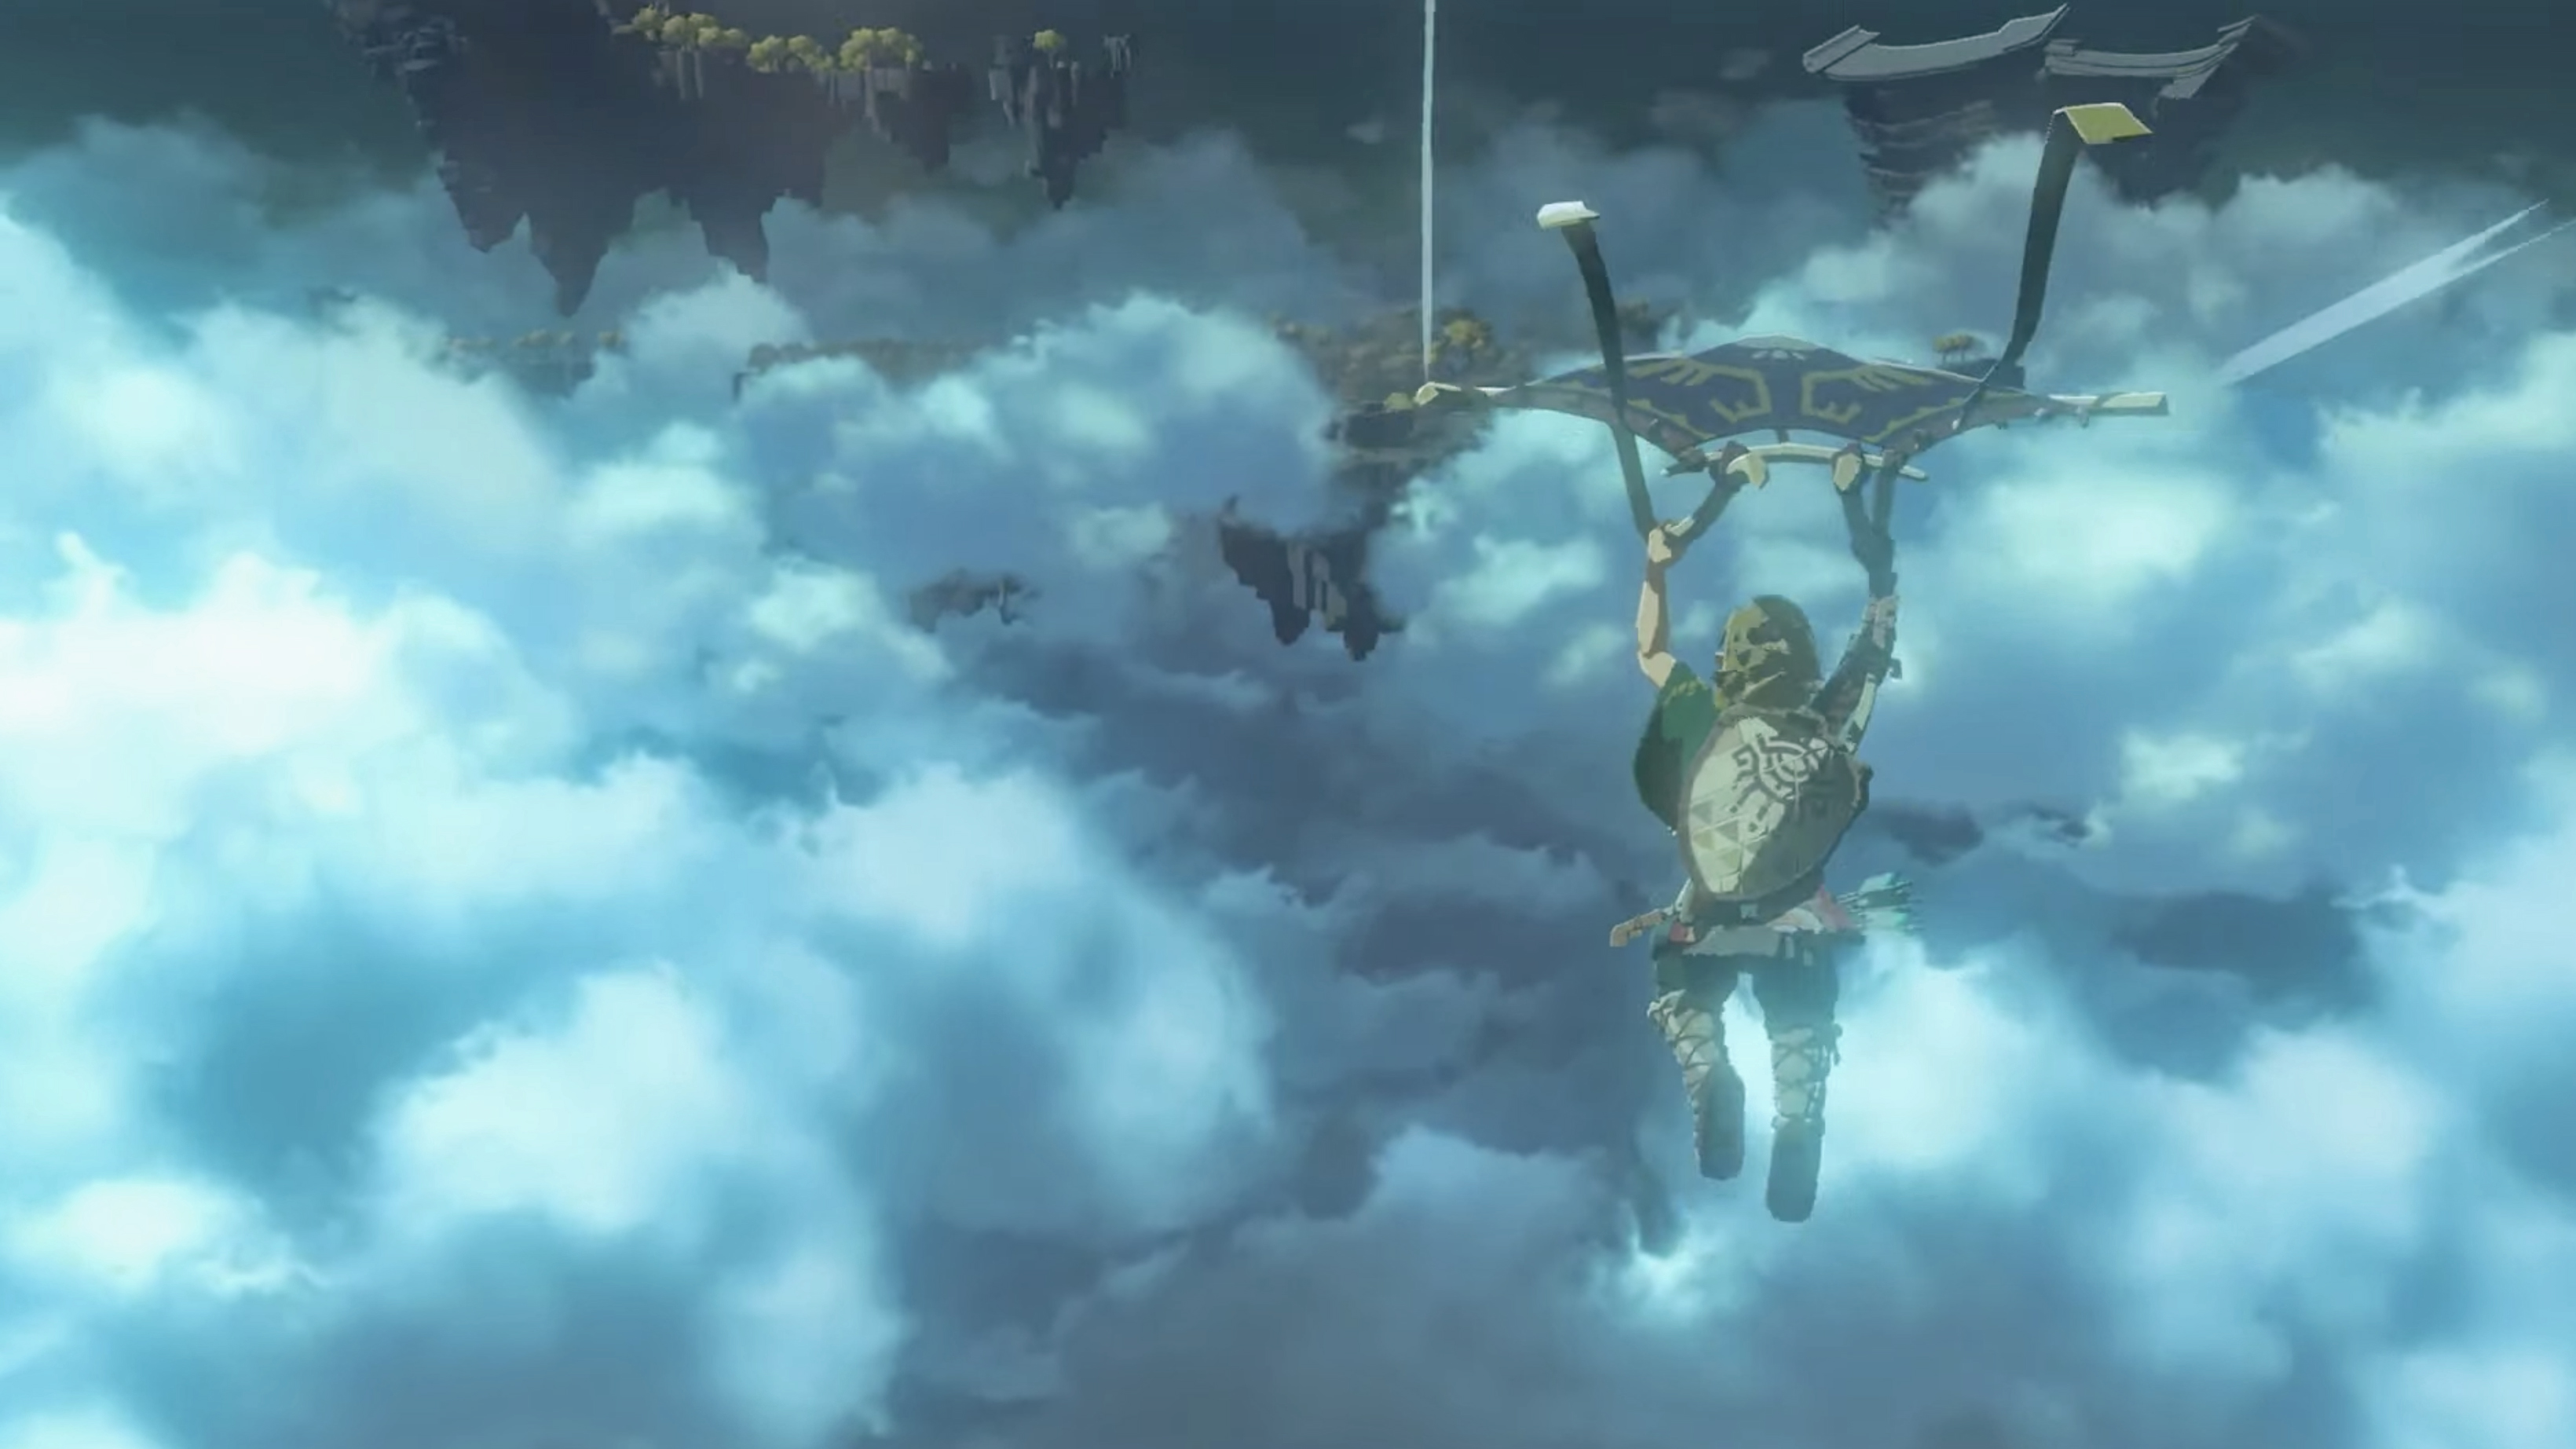 Breath of the Wild 2 trailer screenshot showing Link paragliding